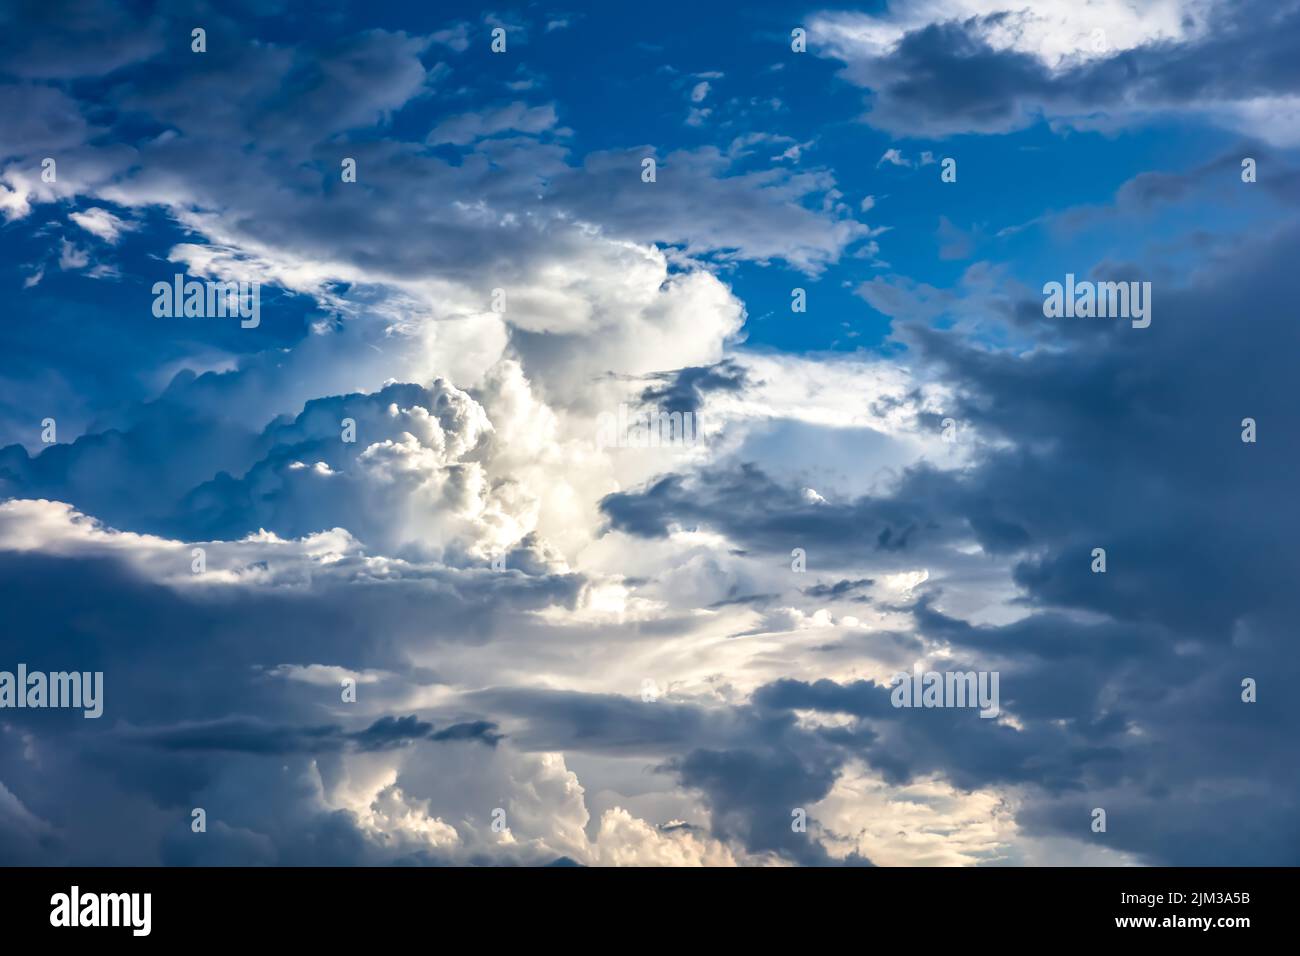 Angry, stormy cloudscape with cumulus and other cloud types. Light and dark cloud formations. Patch of blue sky. Stock Photo